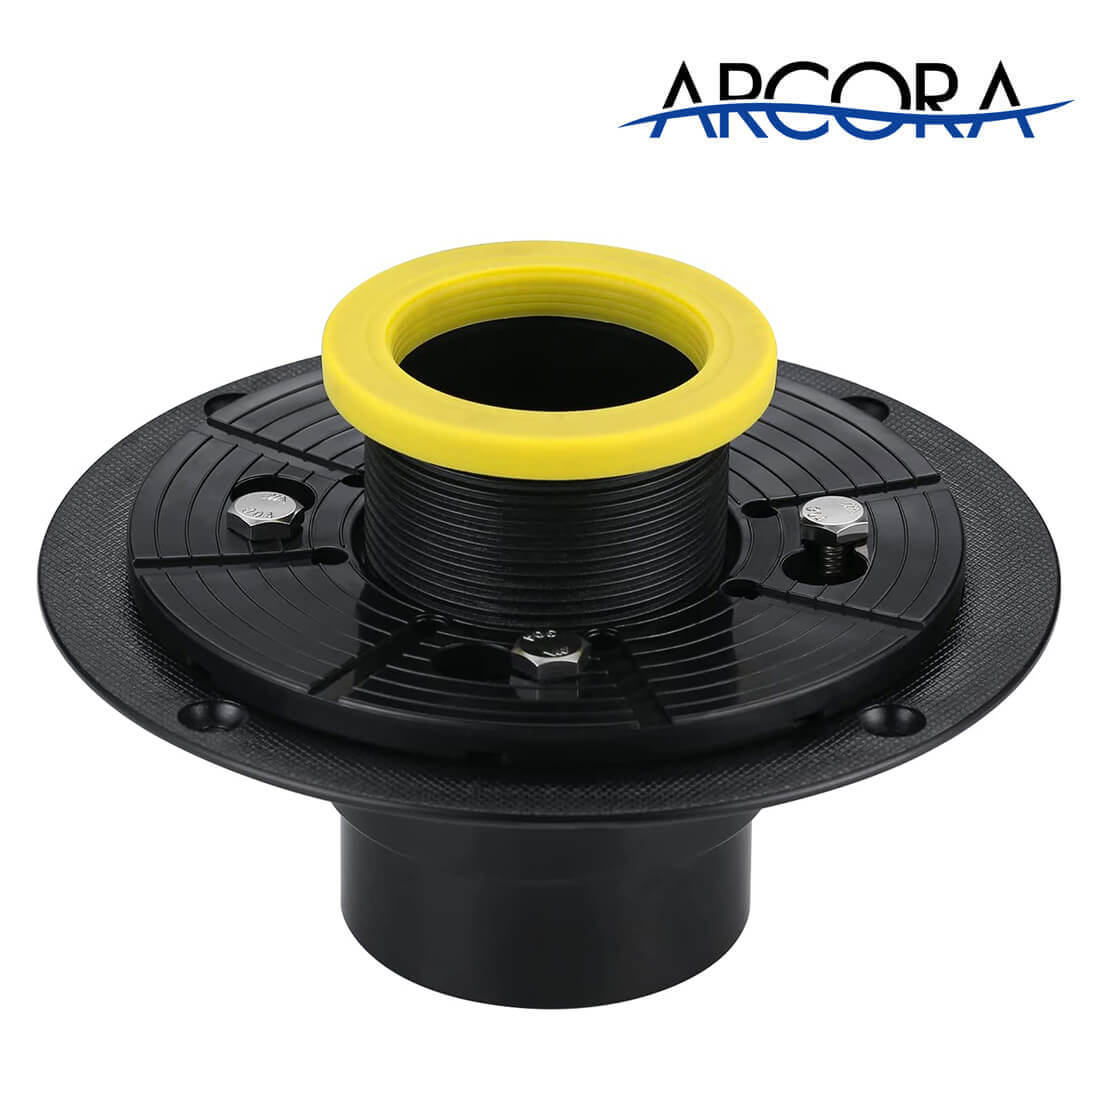 ARCORA 2-Inch ABS Shower Drain Base for Square & Linear Shower Drain